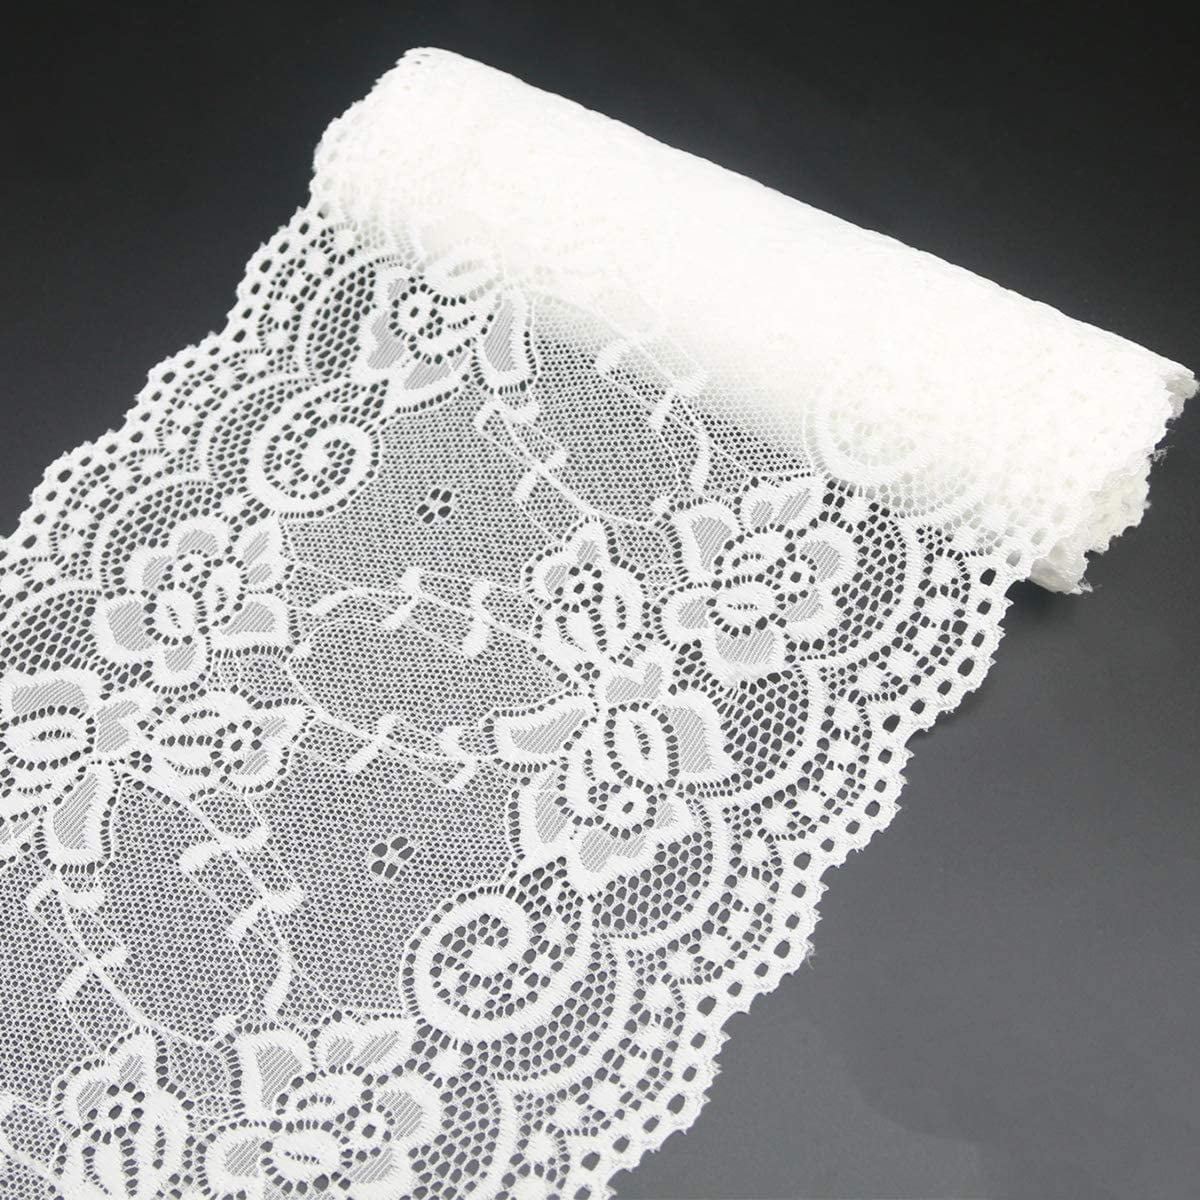 7 Wide White Lace Fabric Sewing Lace Ribbon Trim Elastic Stretchy Lace for  Crafting 5 Yard 